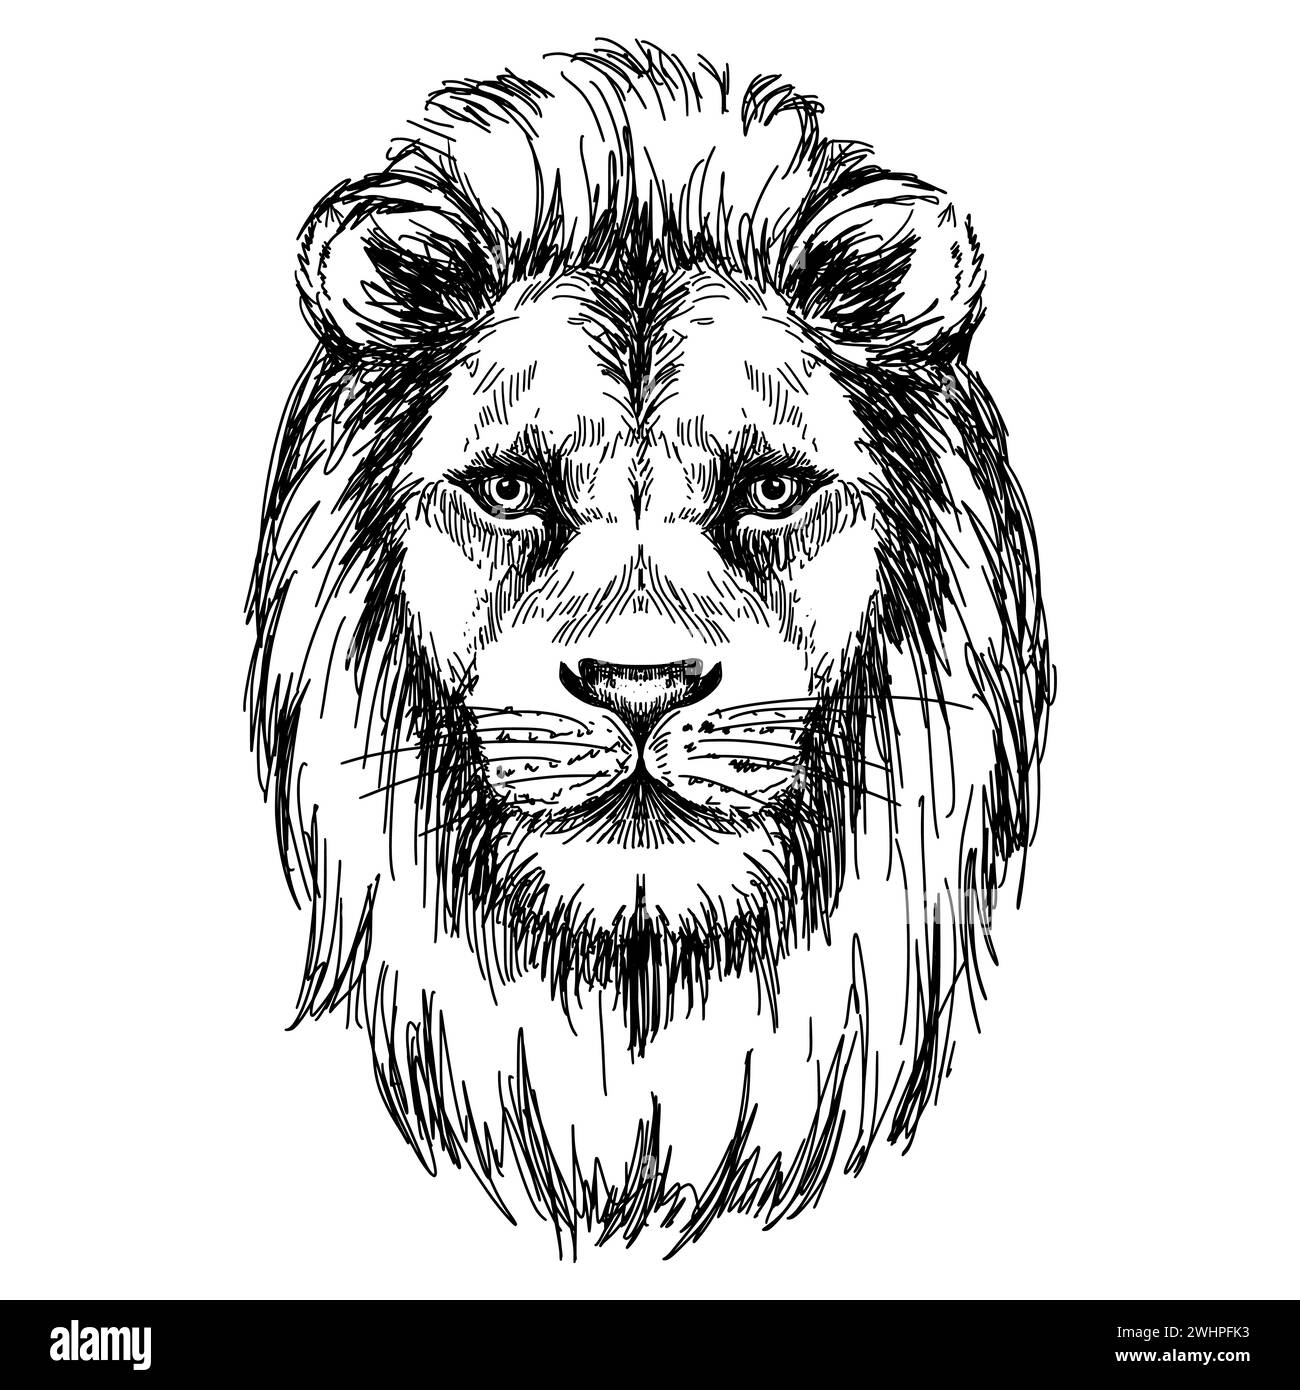 Hand drawn lion head vector sketch isolated on white background. Vintage etching illustration. Stock Vector